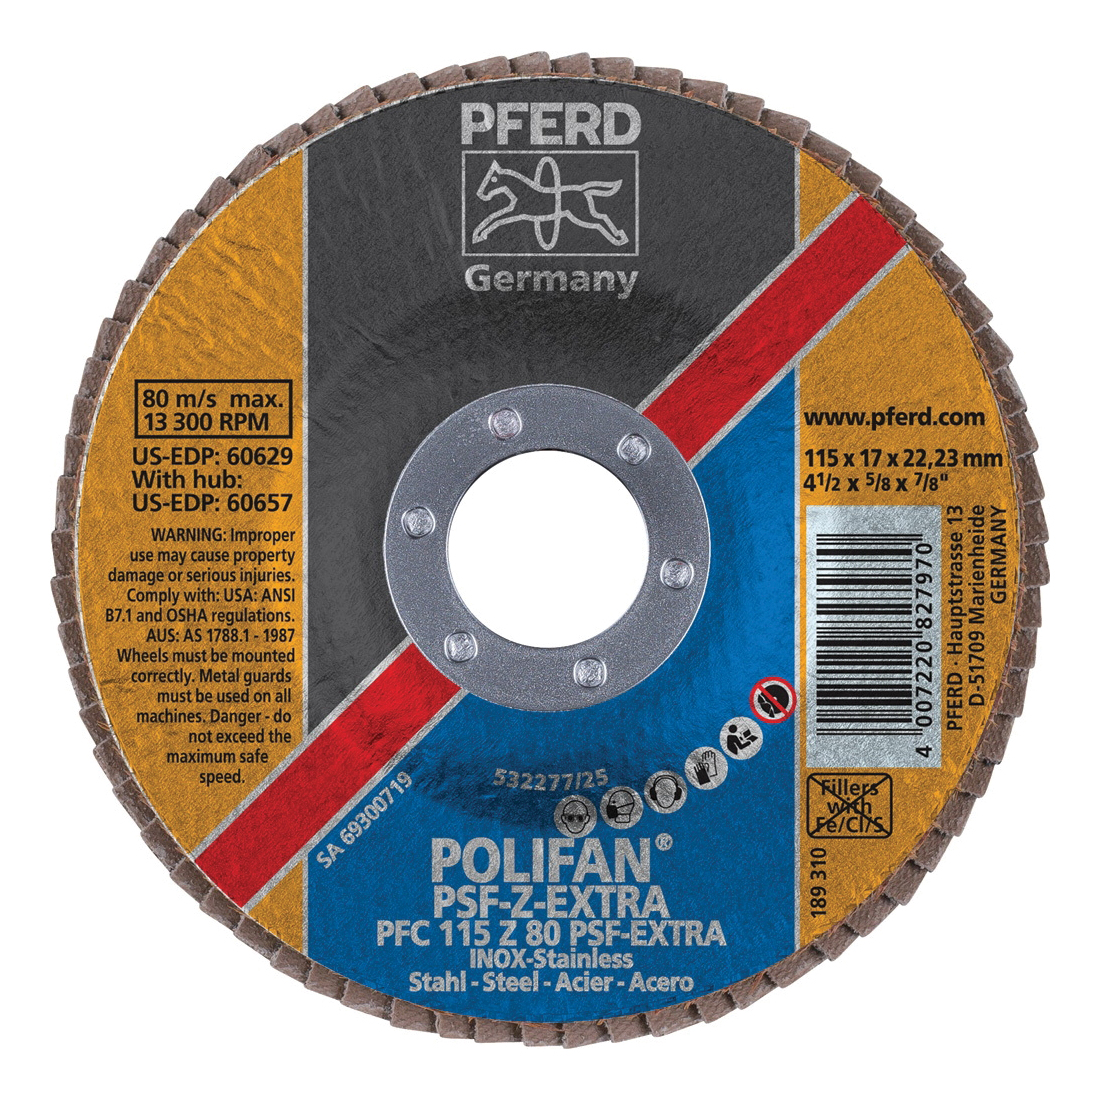 PFERD Polifan® 60629 Universal Line PSF Z-EXTRA Unthreaded Coated Abrasive Flap Disc, 4-1/2 in Dia, 7/8 in Center Hole, 80 Grit, Zirconia Alumina Abrasive, Type 29 Conical Disc